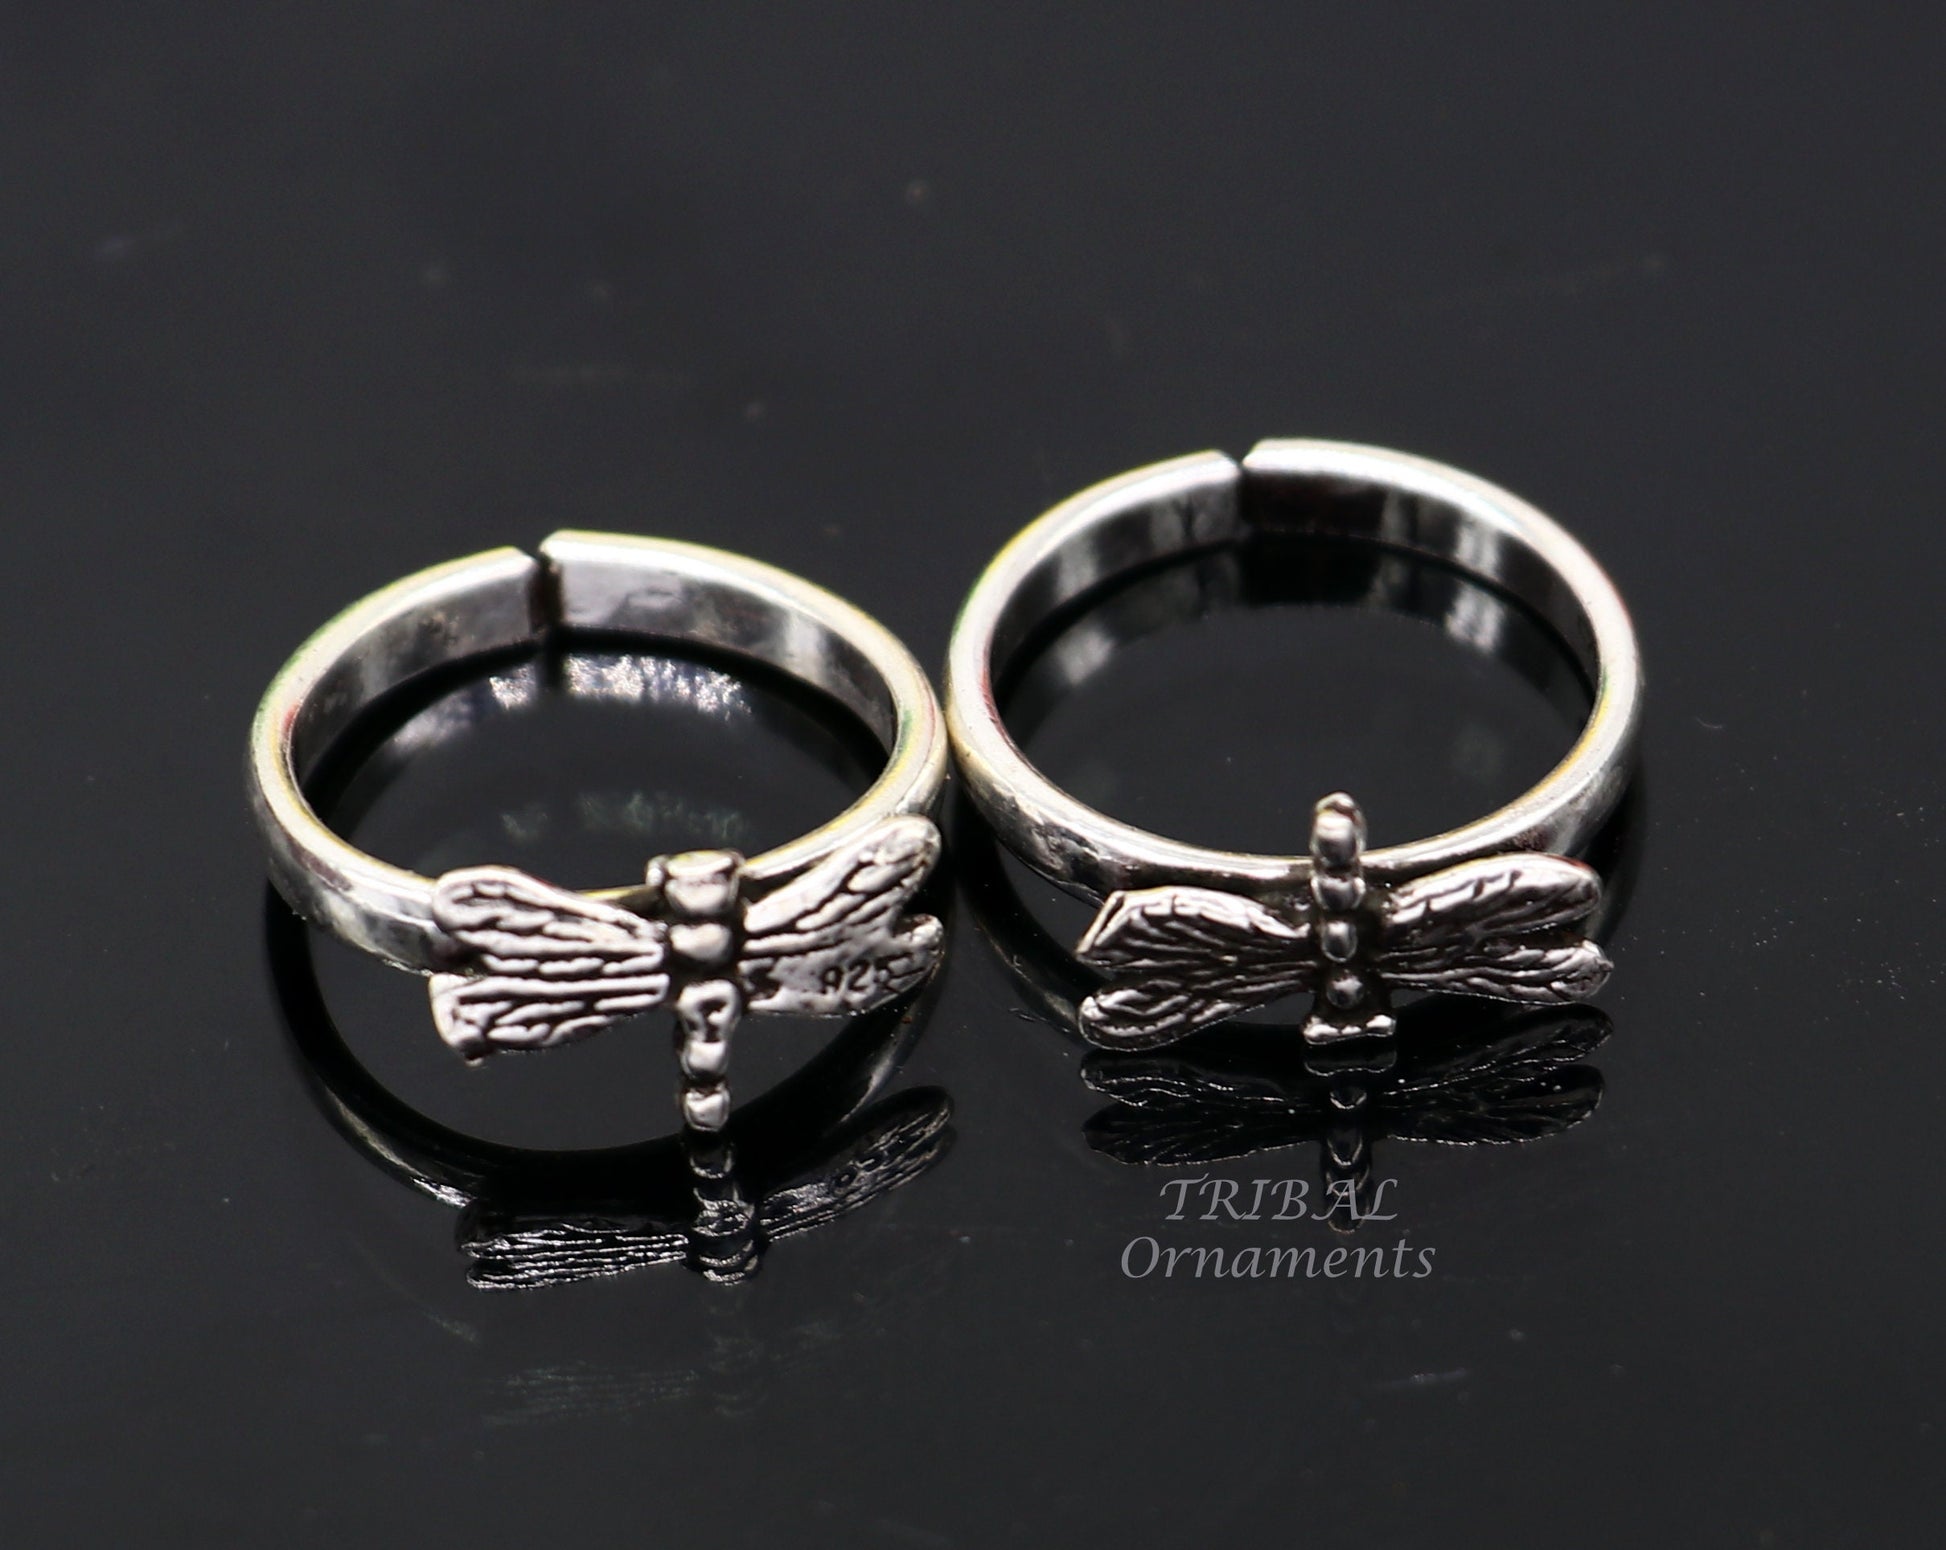 925 sterling silver handmade fabulous butterfly design toe ring band tribal belly dance vintage style ethnic jewelry ytr39 - TRIBAL ORNAMENTS